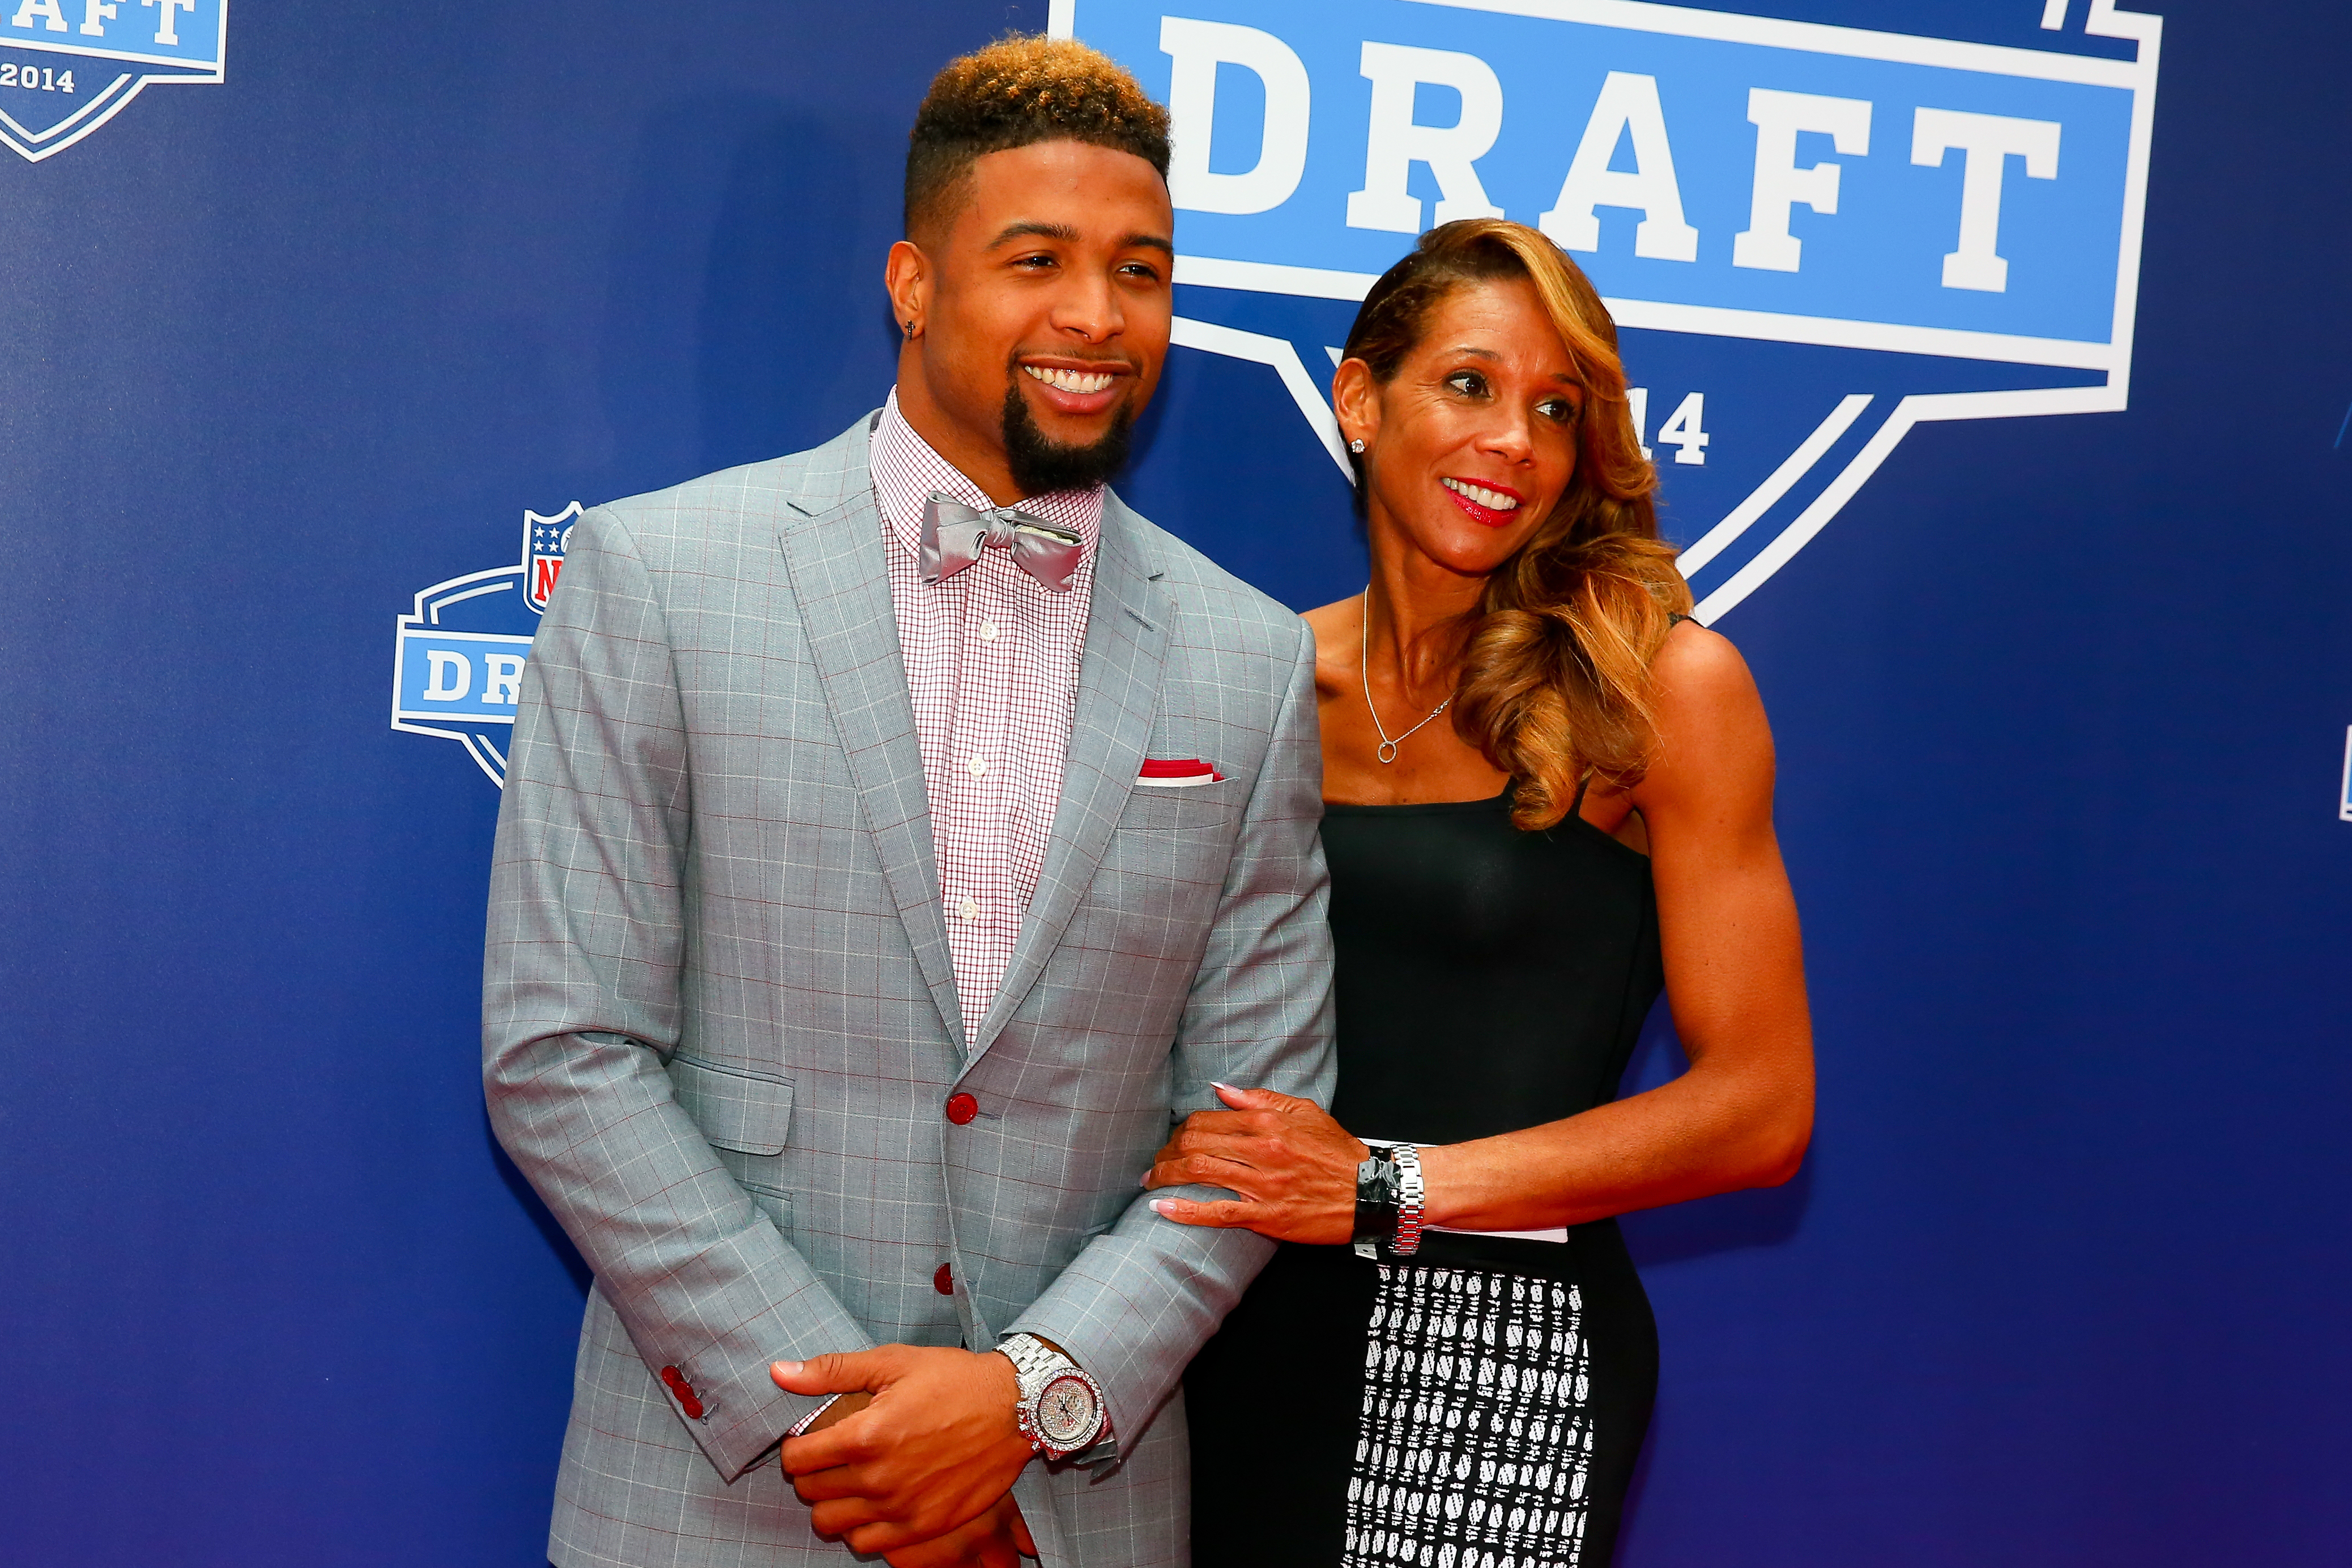 Odell Beckham Jr and Heather Van Norman at the 2014 NFL Draft in New York City. | Source: Getty Images